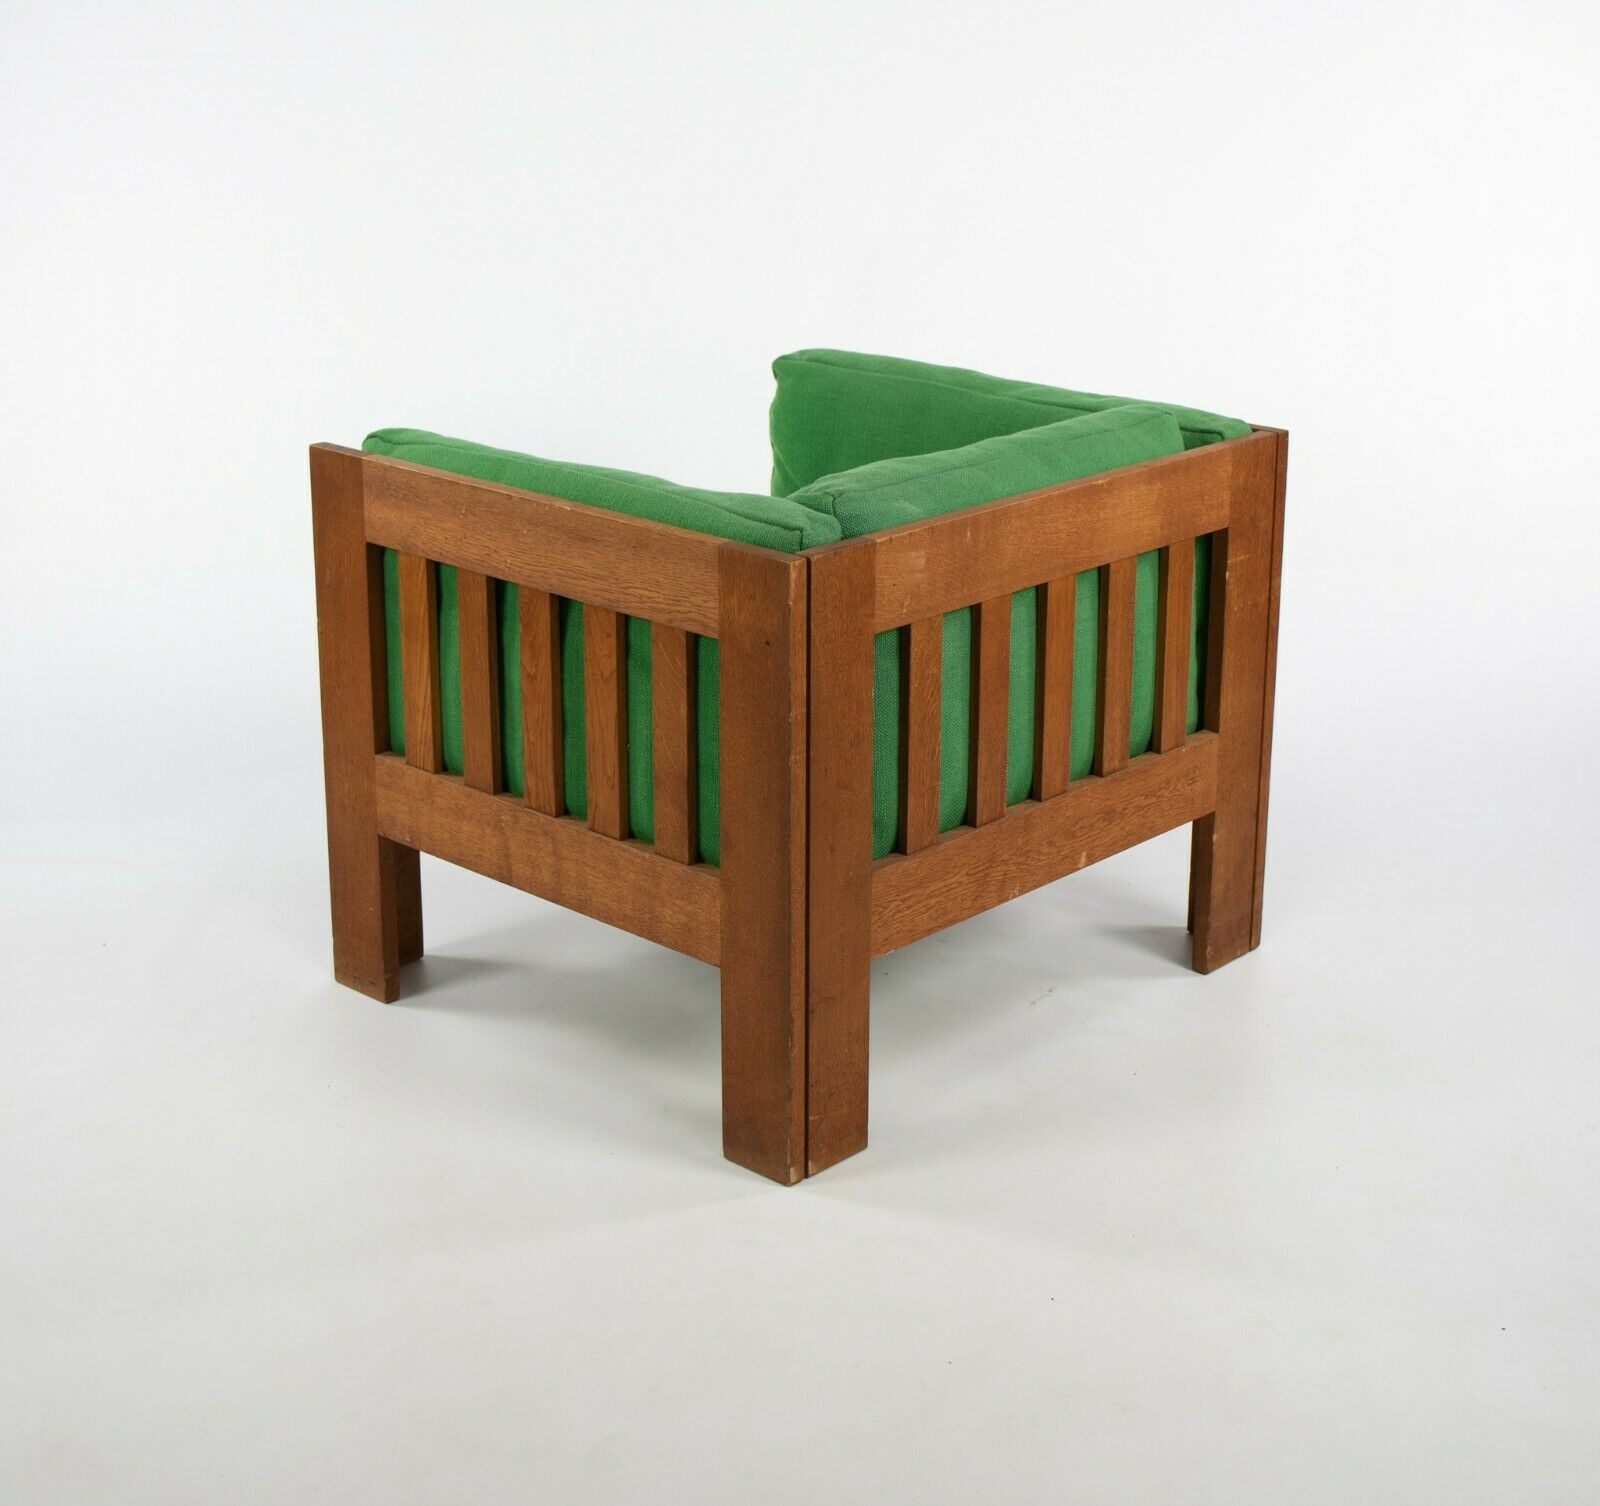 1975 Tage Poulsen TP63 Lounge Chair by CI Designs in Oak with Green Upholstery